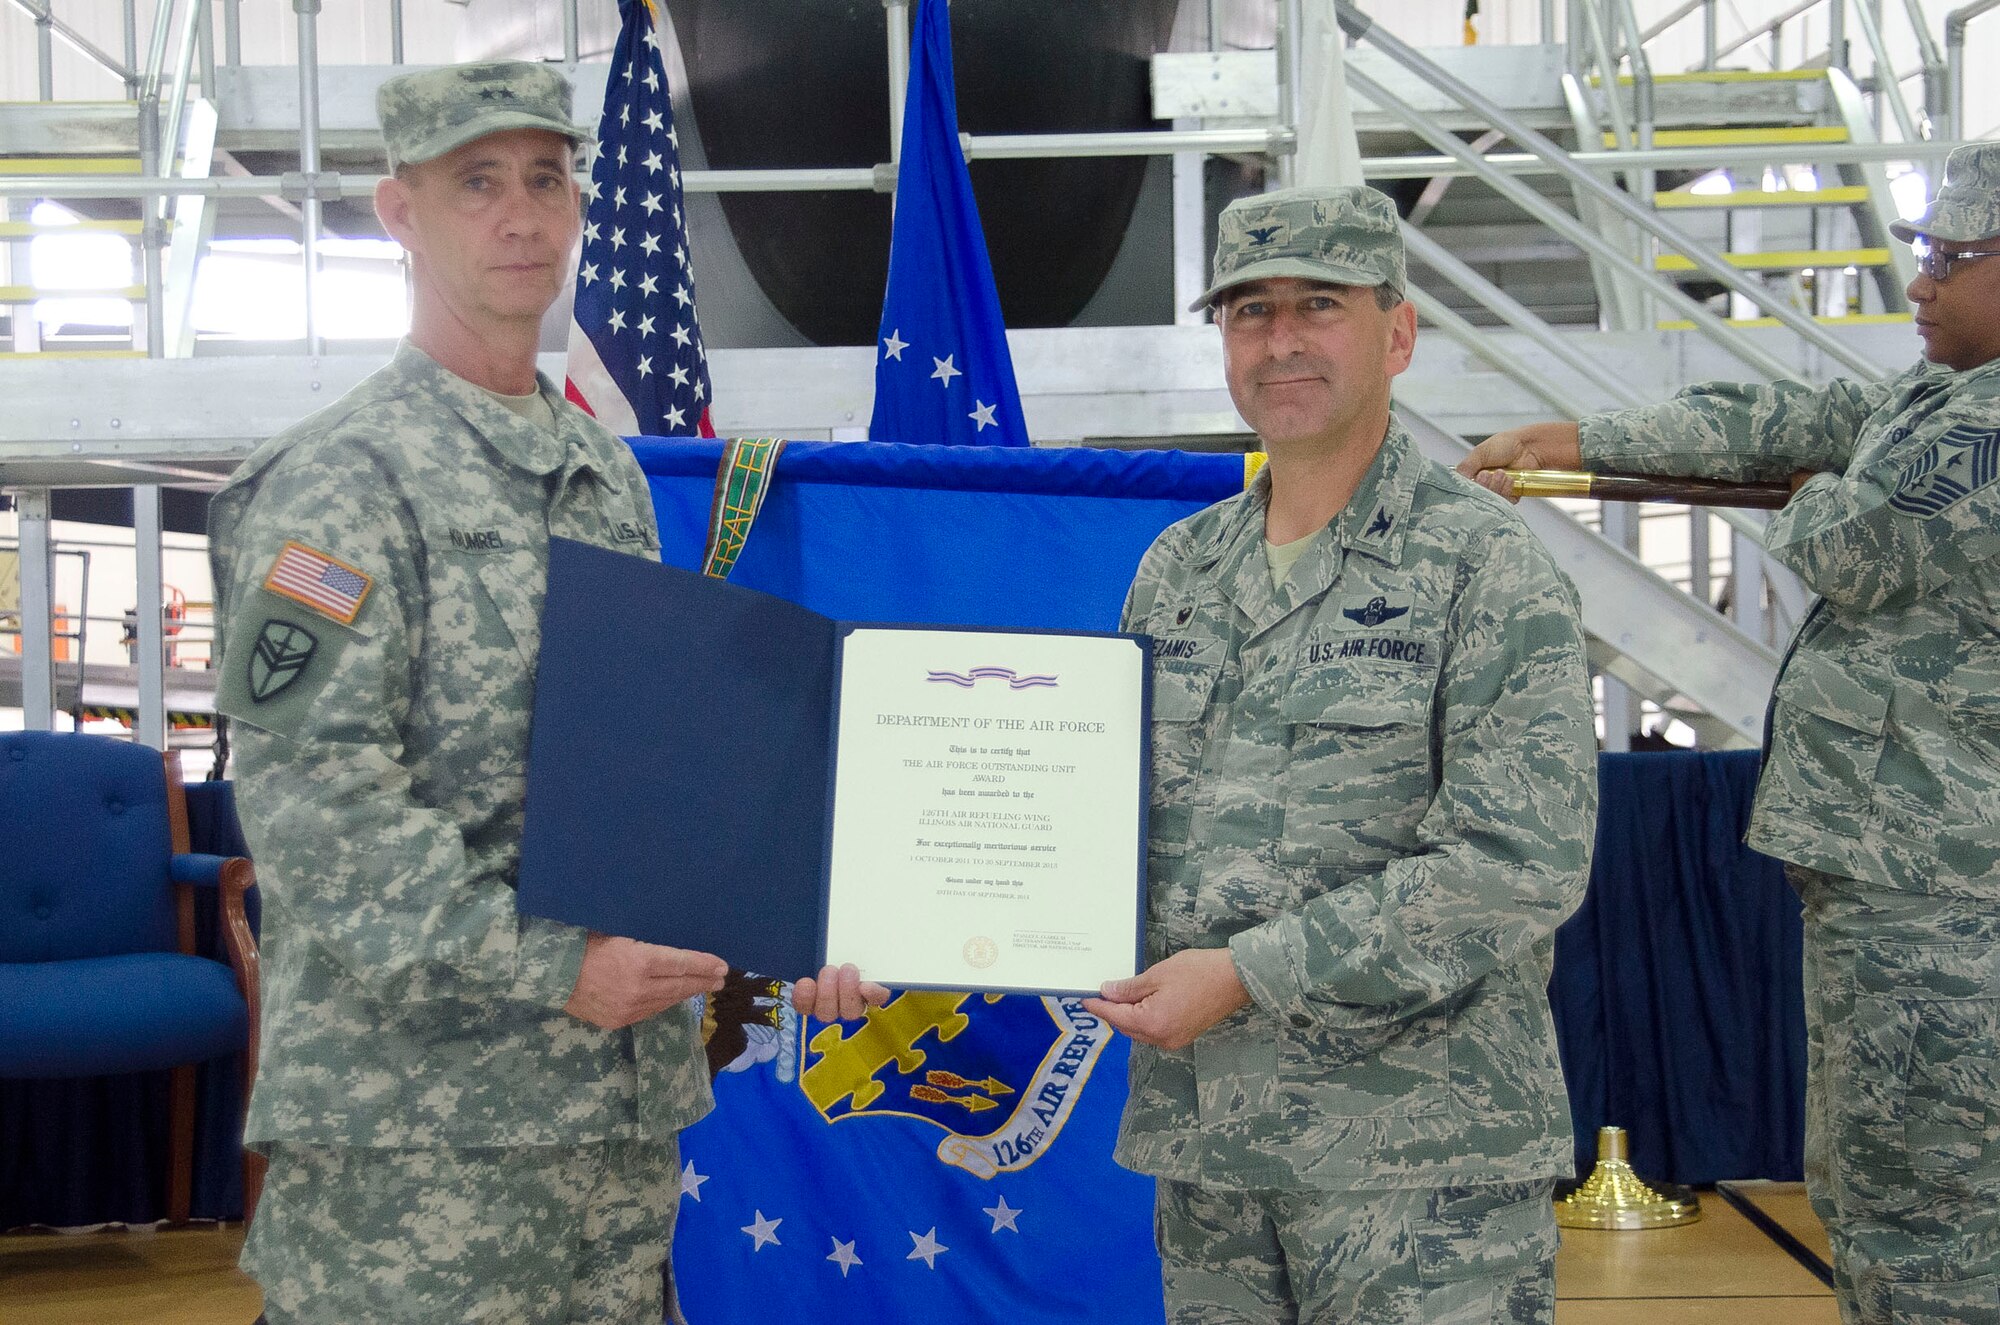 Army Maj. Gen. Daniel M. Krumrei (left), the 38th Adjutant General of the State of Illinois, presents the Air Force Oustanding Unit Award to Col. Peter Nezamis, Commander of the 126th Air Refueling Wing, at Scott Air Force Base, Saturday, Oct. 4, 2014. The Illinois Air National Guard unit received the award for distinguishing itself for exceptionally meritorious service from Oct. 1, 2011 to Sept. 30, 2013. (Air National Guard photo by Master Sgt. Ken Stephens)